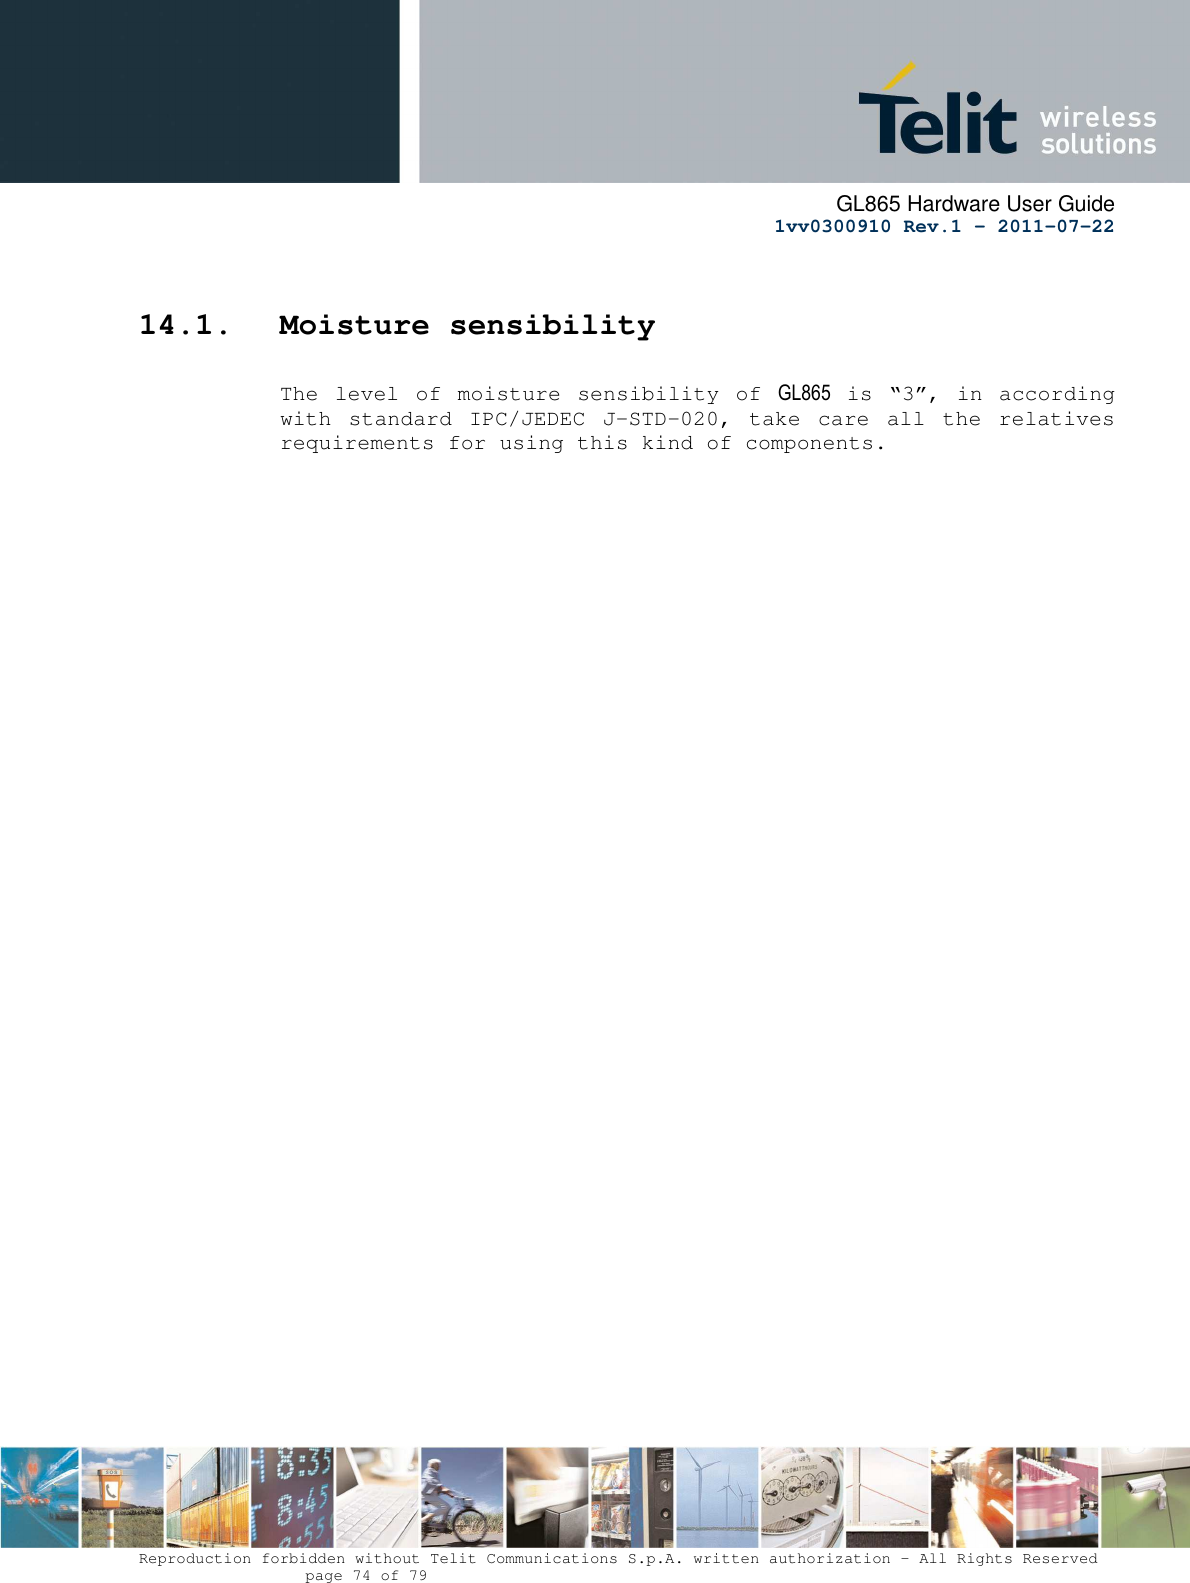      GL865 Hardware User Guide     1vv0300910 Rev.1 – 2011-07-22       Reproduction forbidden without Telit Communications S.p.A. written authorization - All Rights Reserved    page 74 of 79   14.1. Moisture sensibility  The  level of moisture  sensibility  of  GL865 is  “3”,  in  according with  standard  IPC/JEDEC  J-STD-020,  take  care  all  the  relatives requirements for using this kind of components.     